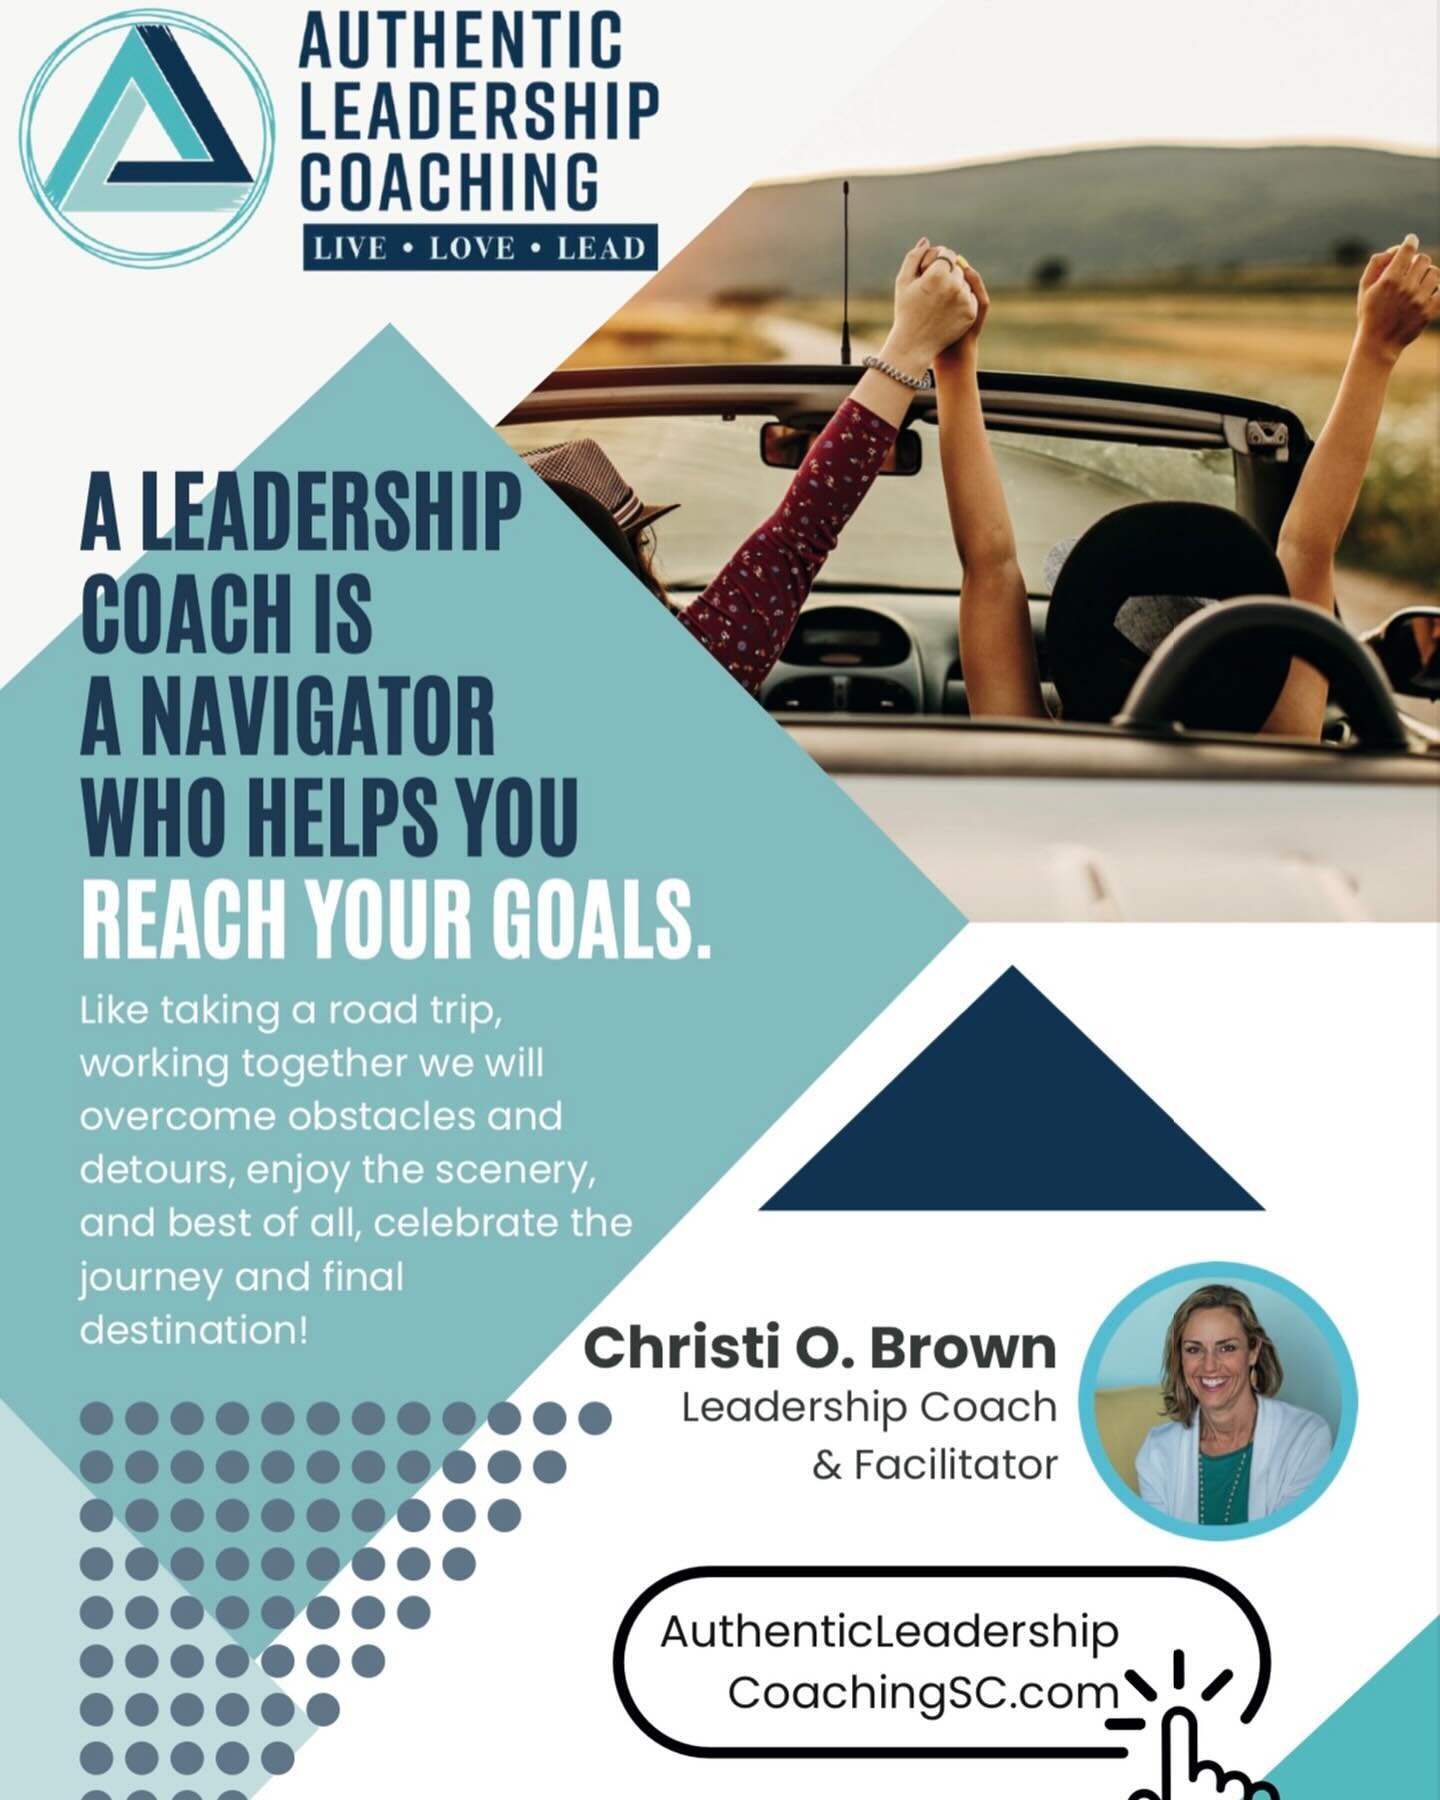 🌟 𝗔𝗨𝗧𝗛𝗘𝗡𝗧𝗜𝗖 𝗟𝗘𝗔𝗗𝗘𝗥𝗦𝗛𝗜𝗣 𝗖𝗢𝗔𝗖𝗛𝗜𝗡𝗚 🌟

In a world where leadership is key, meet the exceptional Christi O. Brown, guiding individuals towards their highest potentials! 🌈 With her unparalleled expertise, she serves as the ult